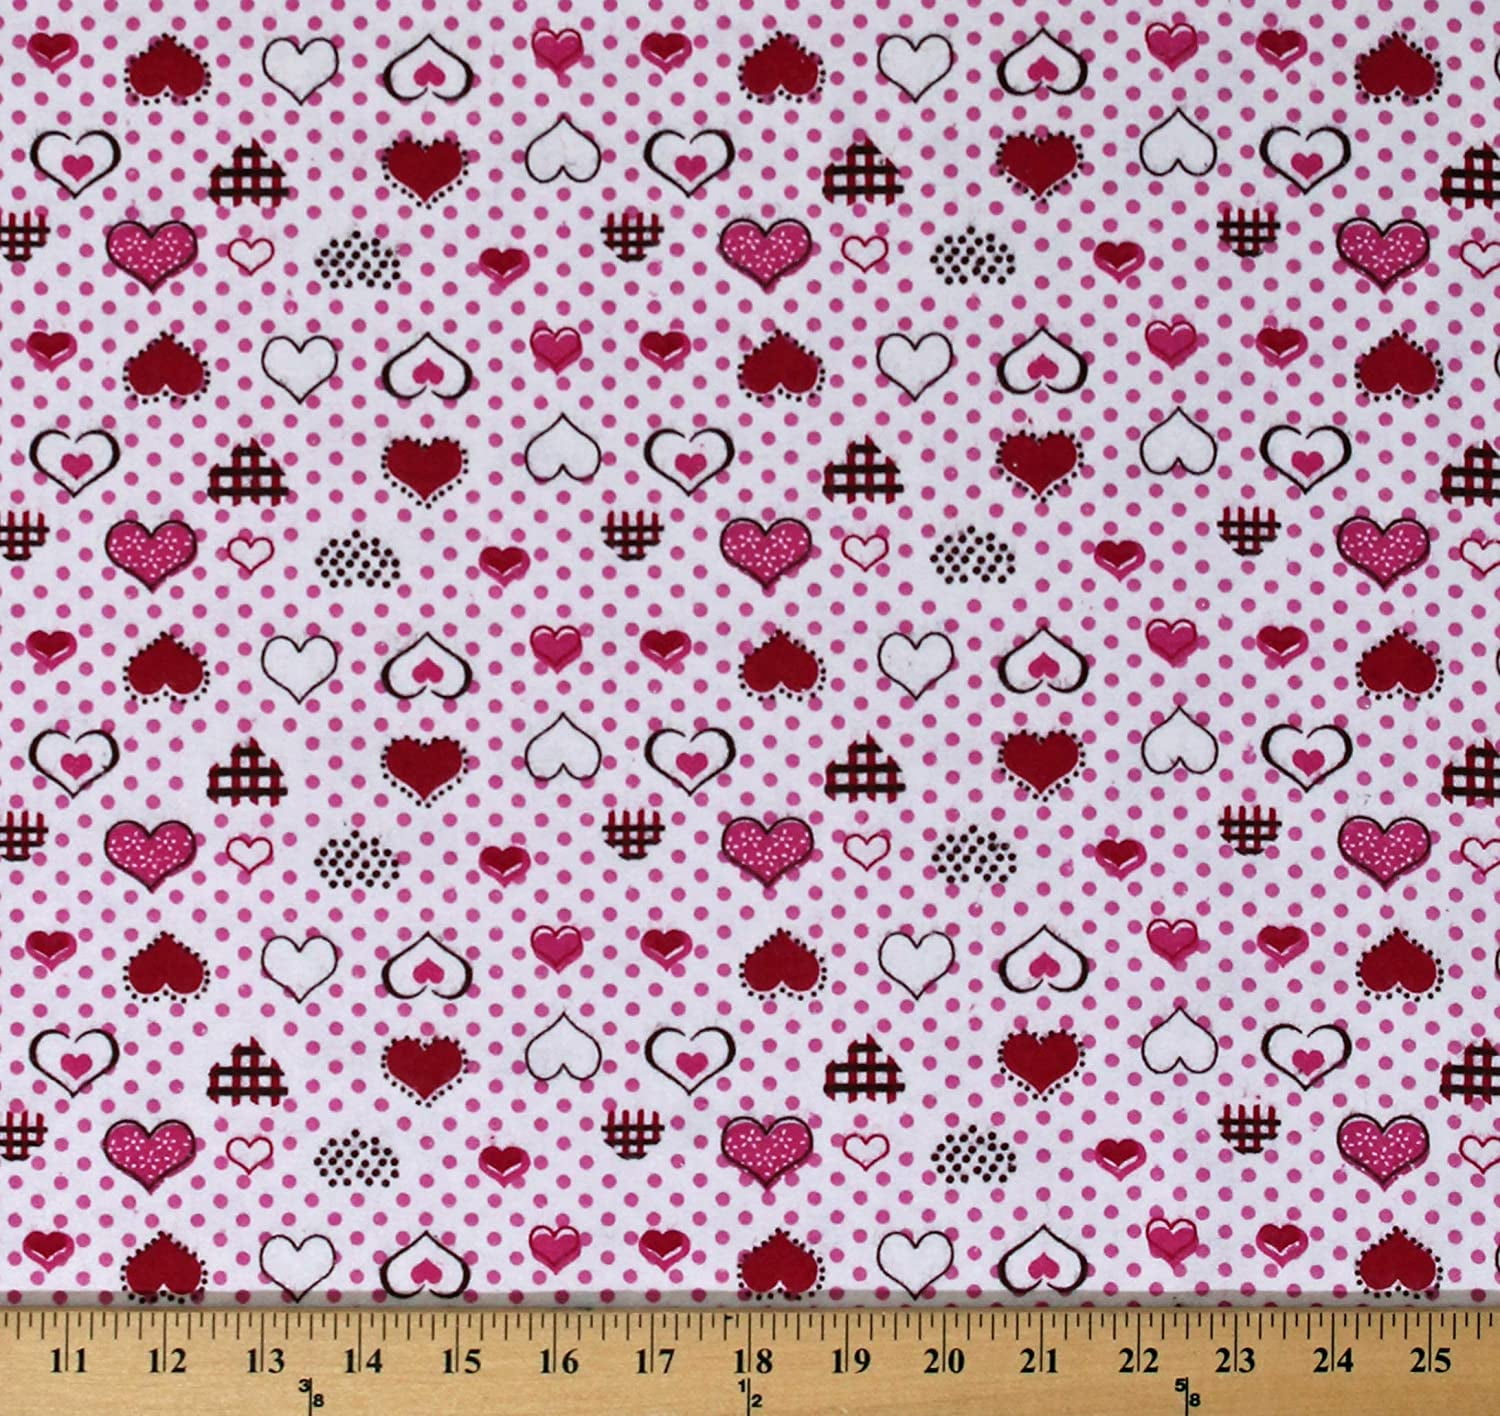 Hearts and Dots on White By the yard Flannel Fabric 100% Cotton Flannel